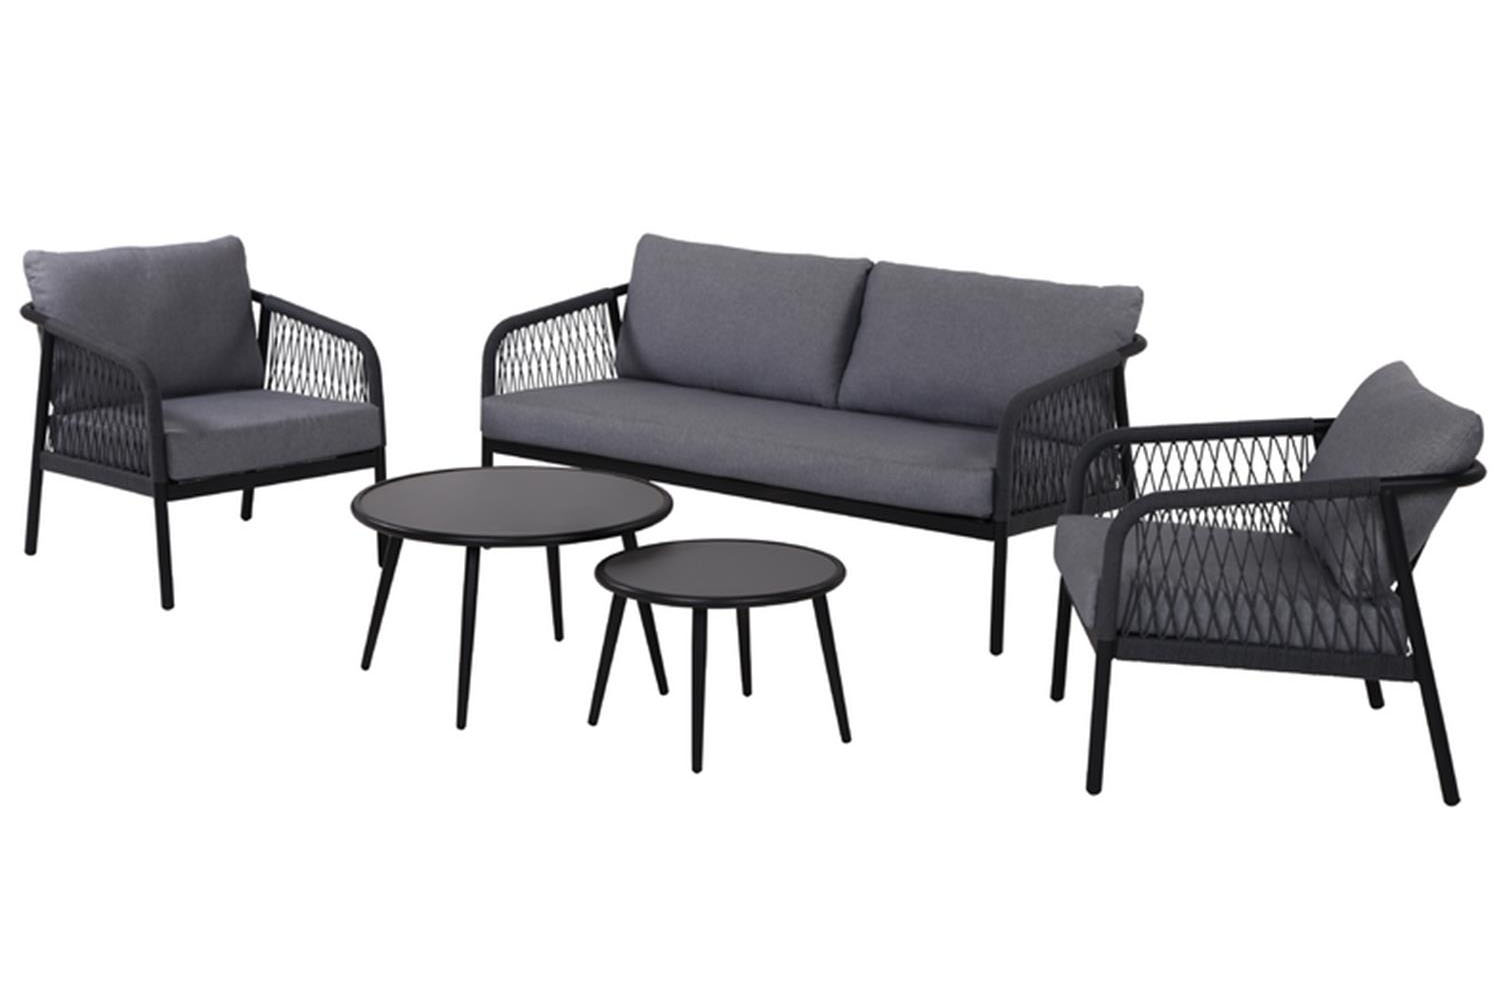 Garden Plus Amador lounge set gray Furniture ideas, Tables, Chair with armrests